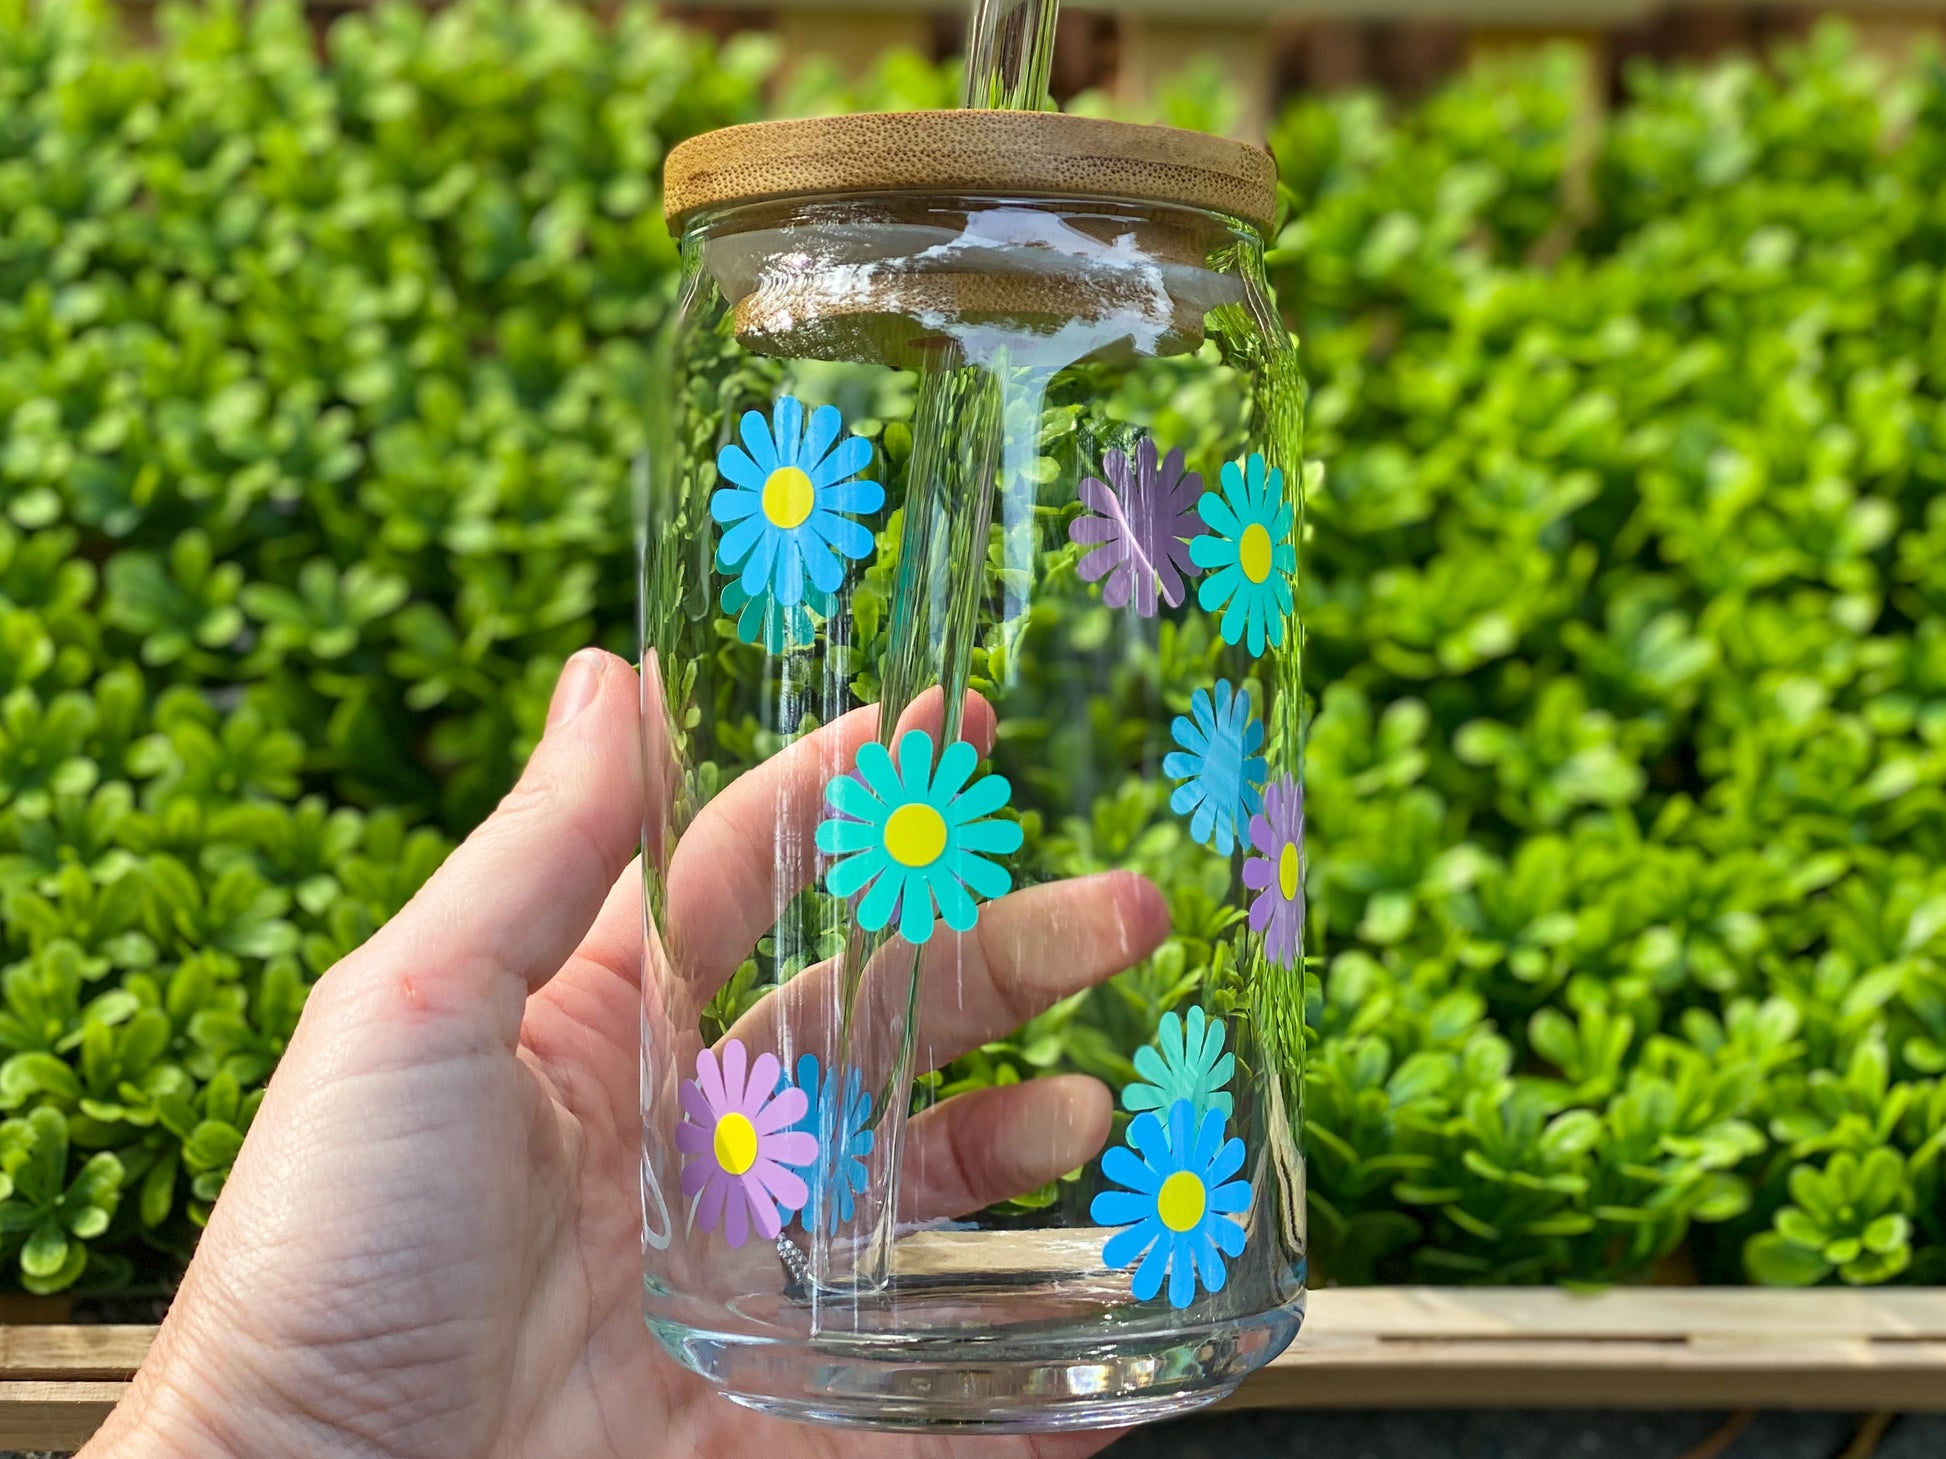 Daisy glass coffee cup, daisy glass cup, iced coffee glass cup, beer can glass cup with daisies, beer can glass, iced coffee cup for daisy lovers, glass cup with daisy design